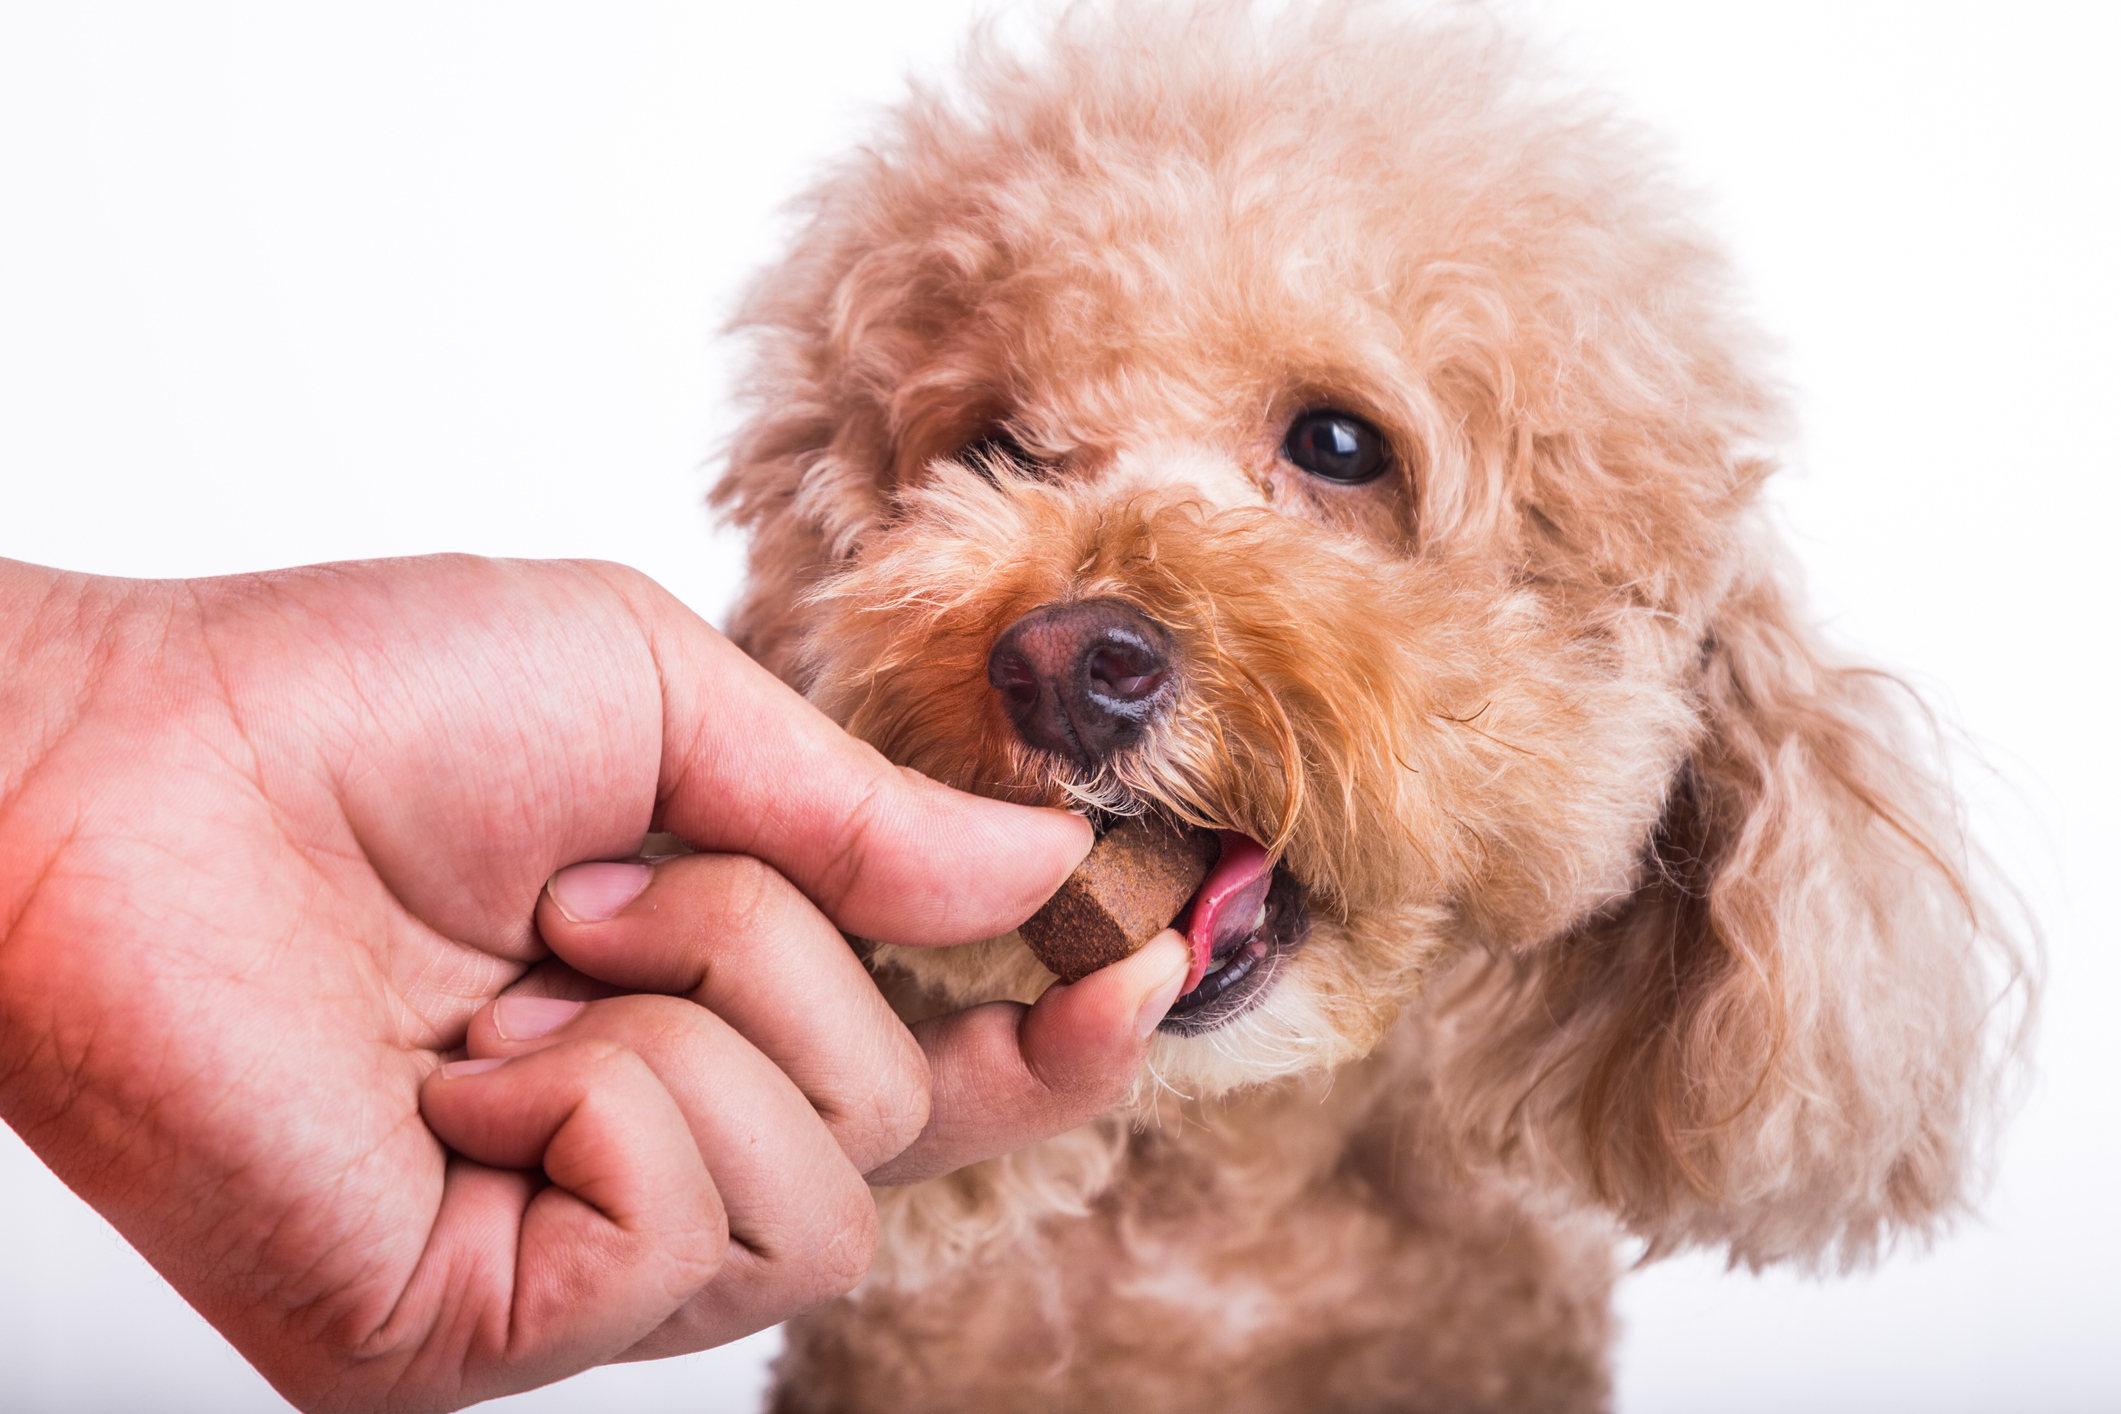 OmegaQuant Expands Omega-3 Testing to Pets – NutraIngredients-usa.com